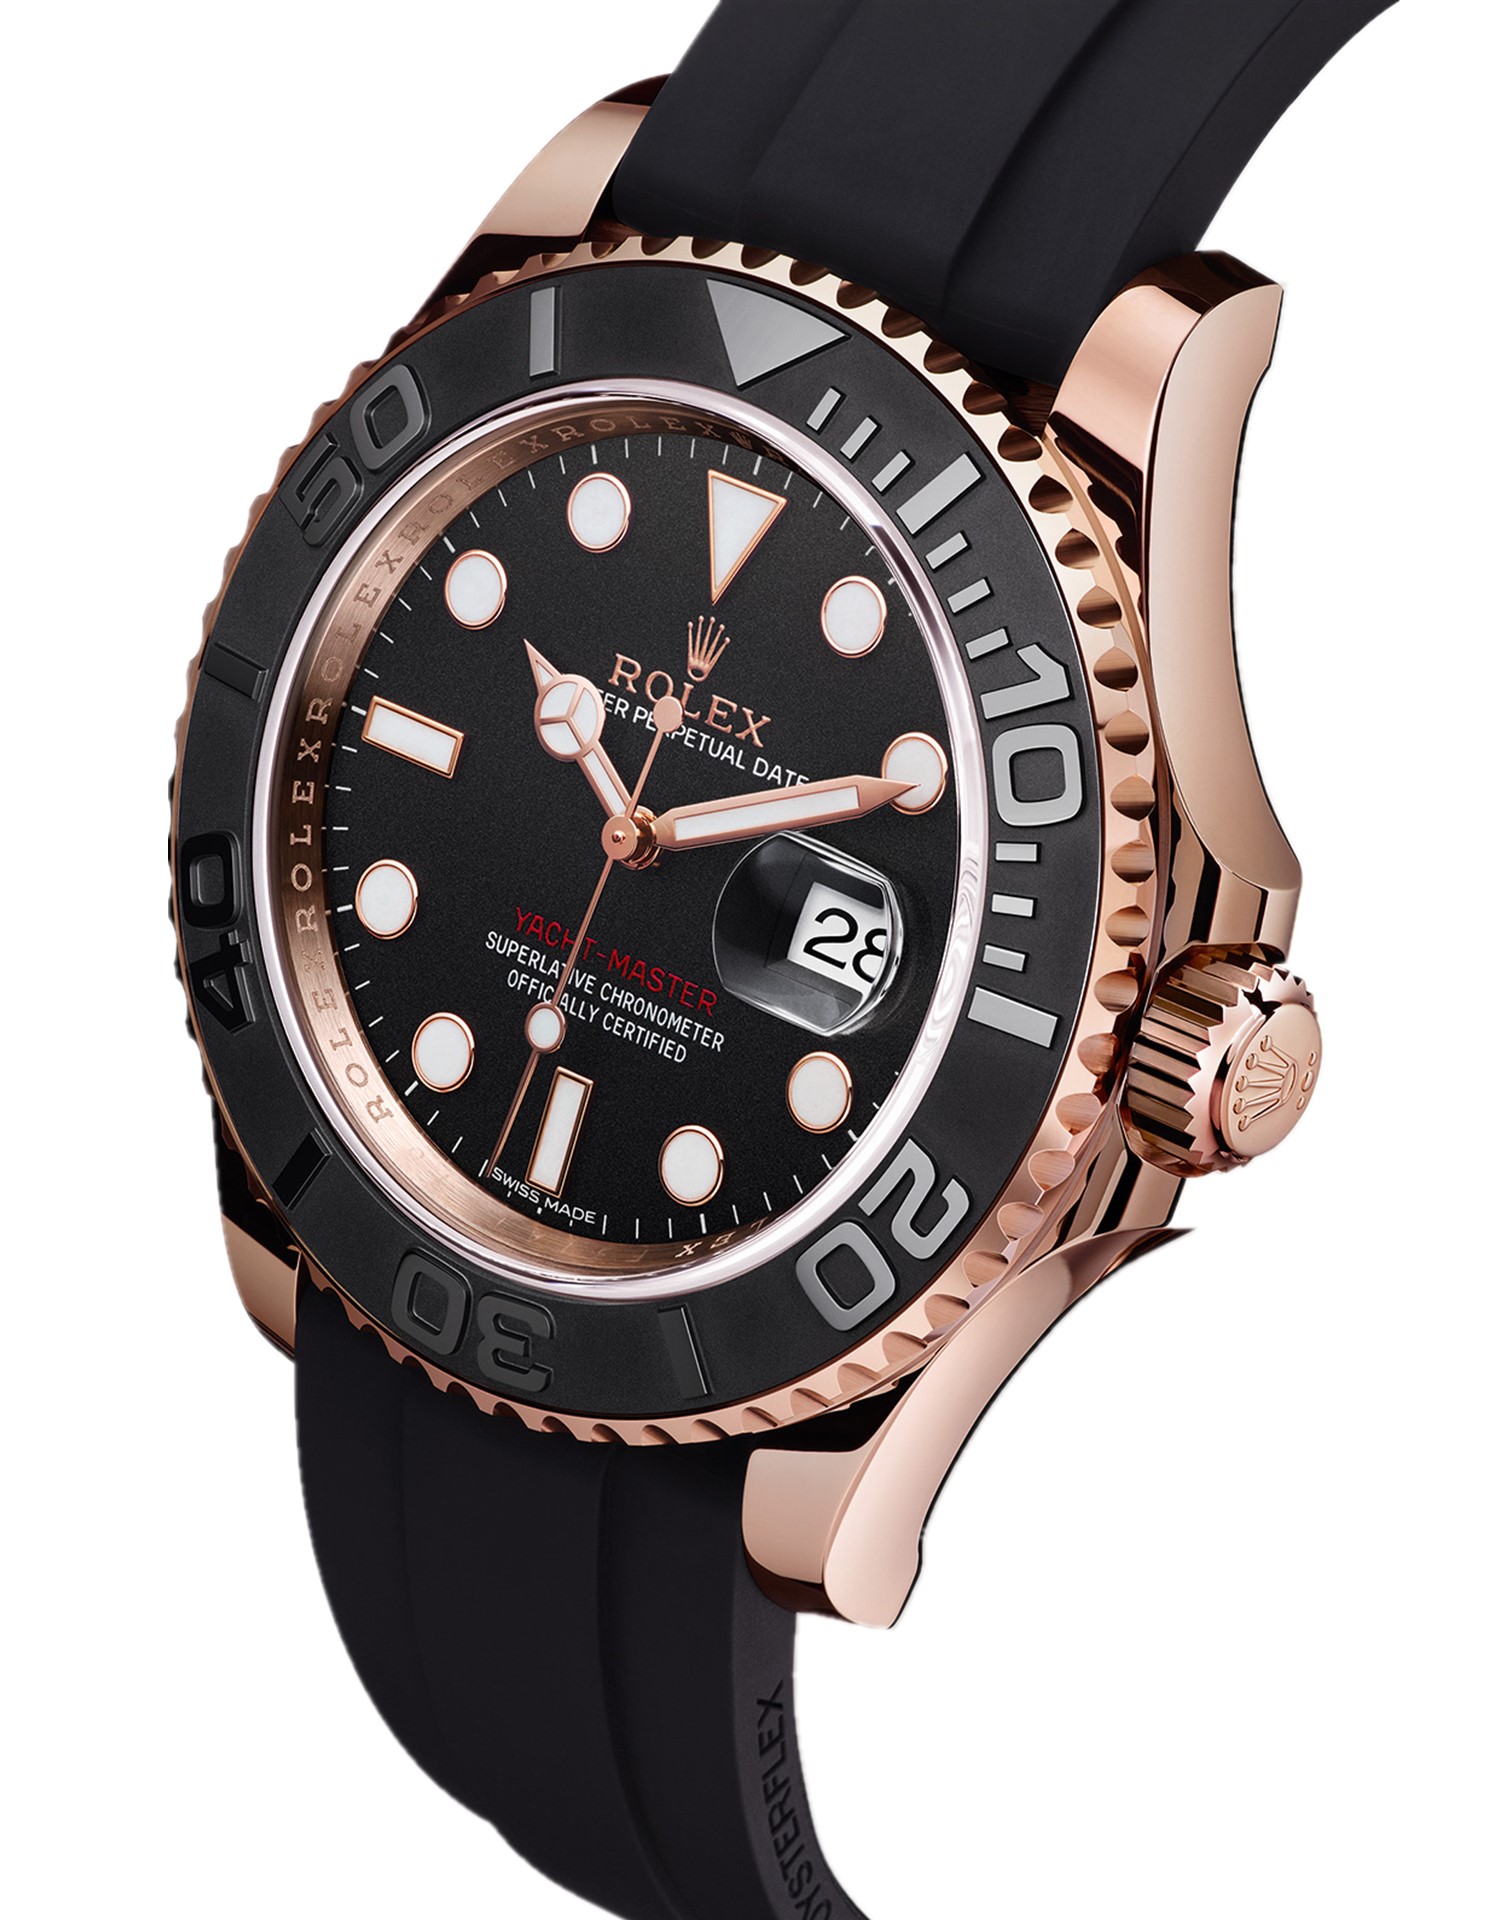 Rolex Yacht Master Rubber Store 116655 Hombres 40MM